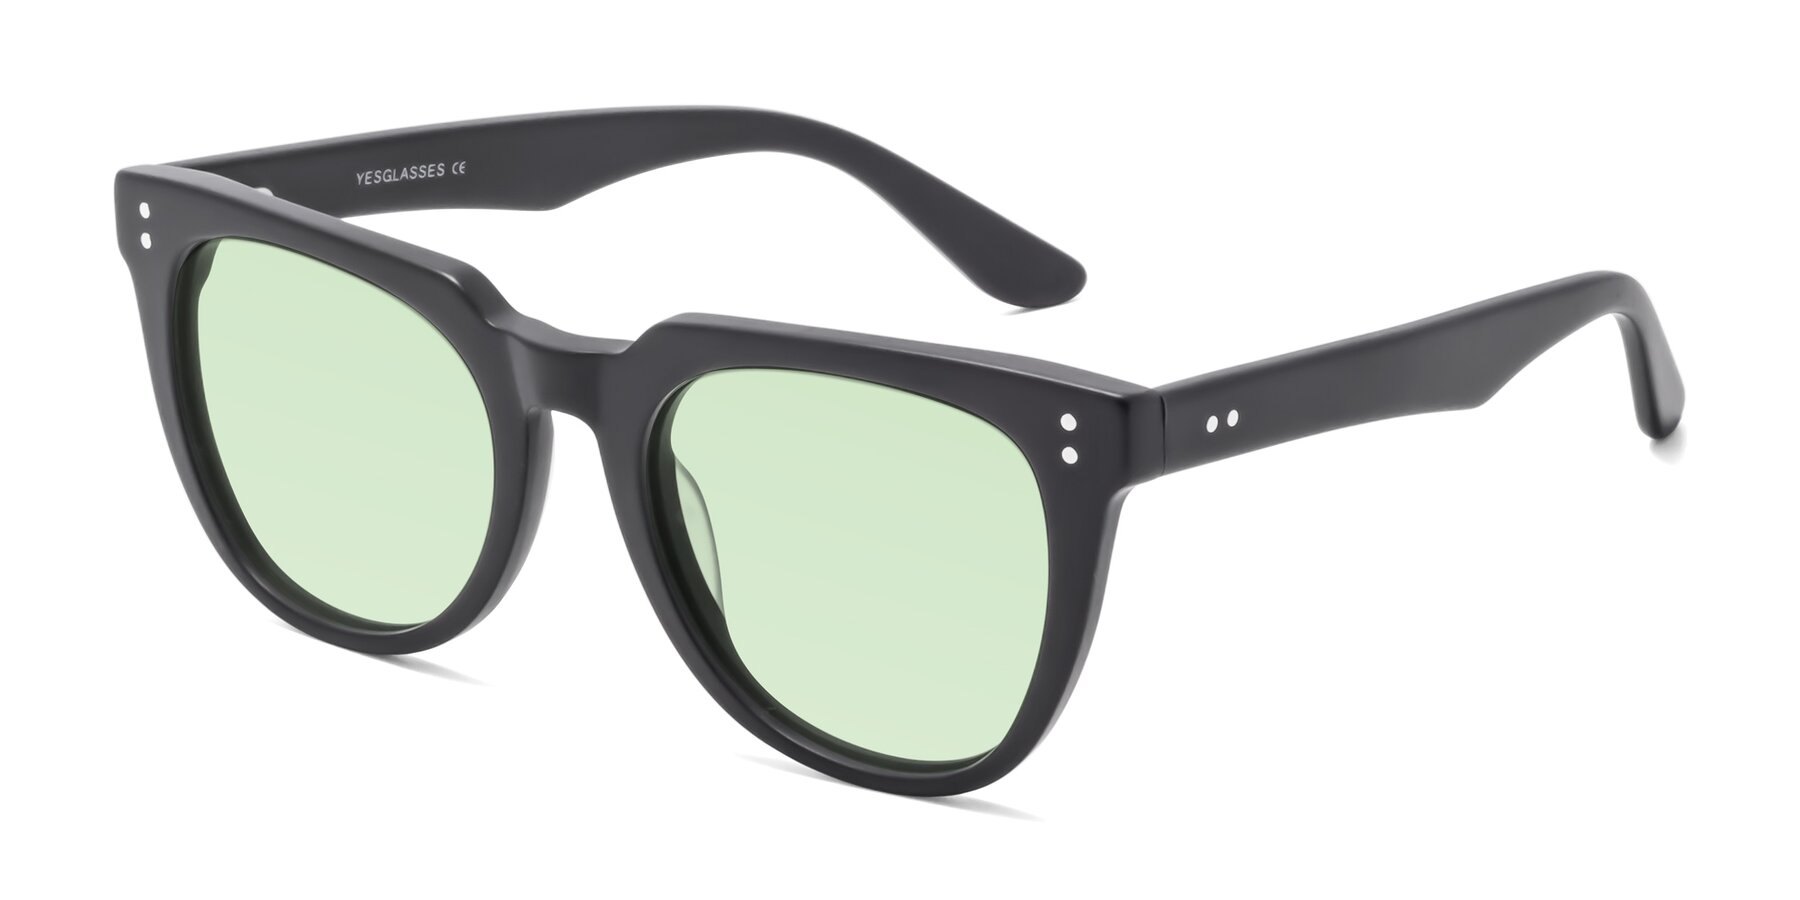 Angle of Graceful in Matte Black with Light Green Tinted Lenses